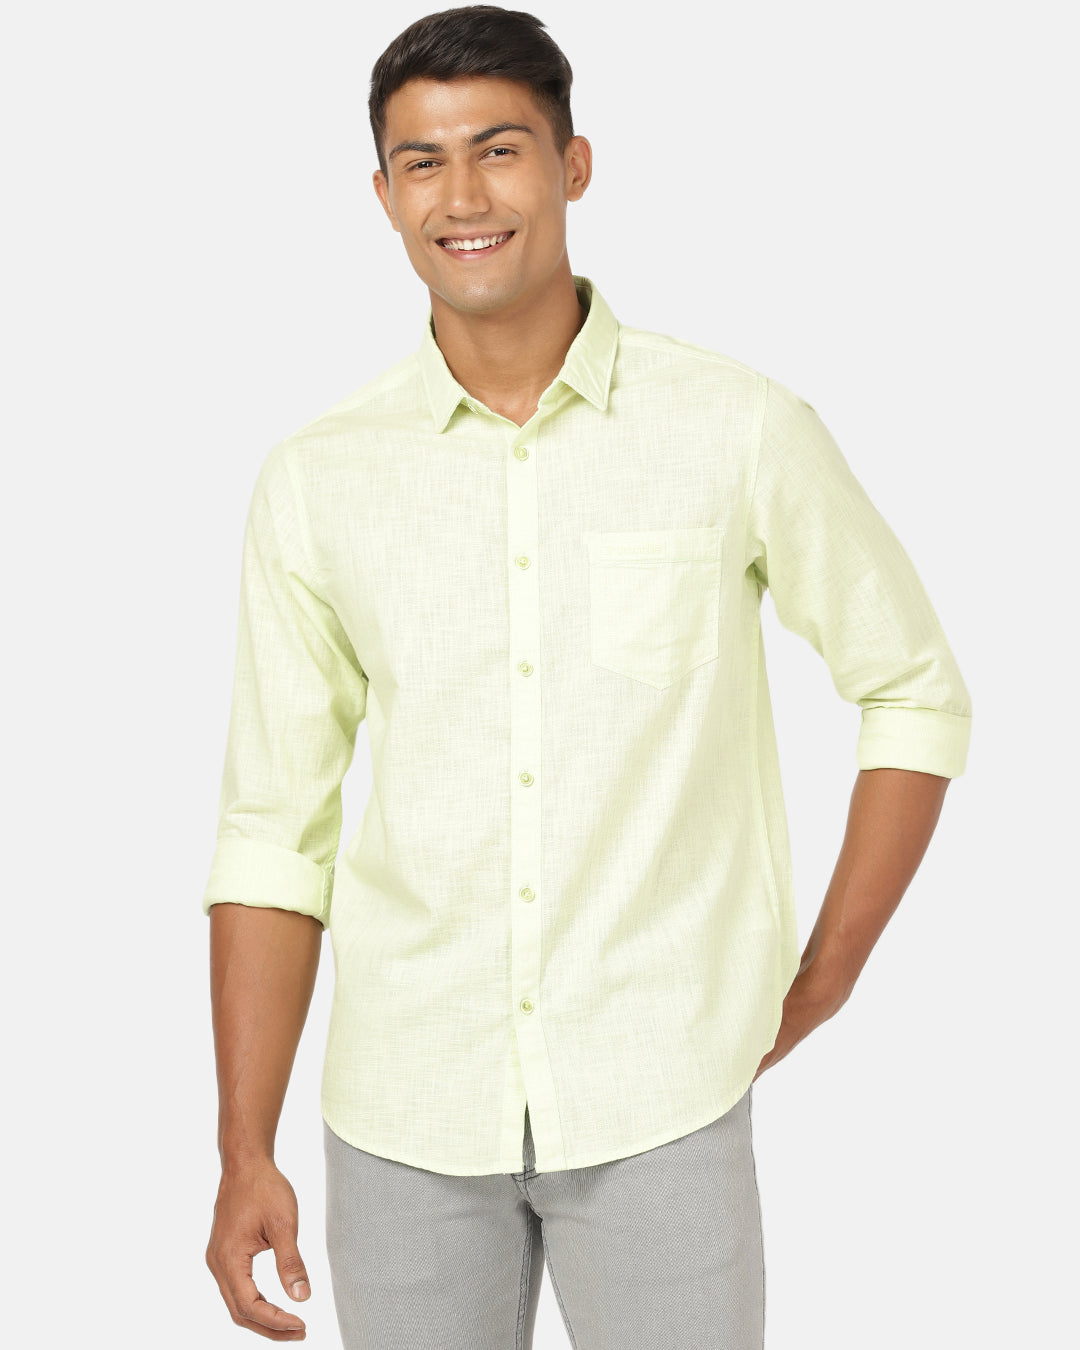 Crocodile Casual Full Sleeve Comfort Fit Solid Light Green with Collar Shirt for Men